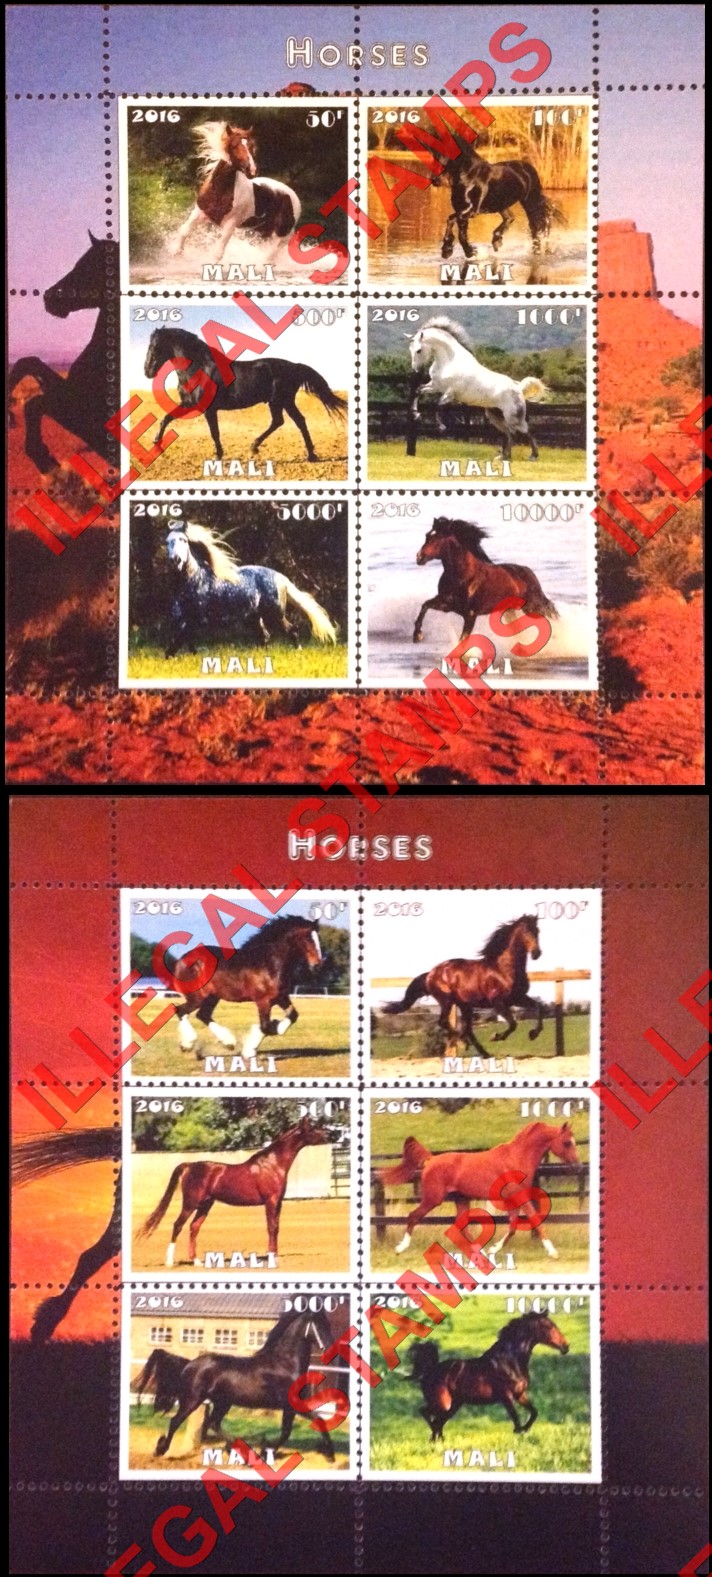 Mali 2016 Horses Illegal Stamp Souvenir Sheets of 6 (Part 2)